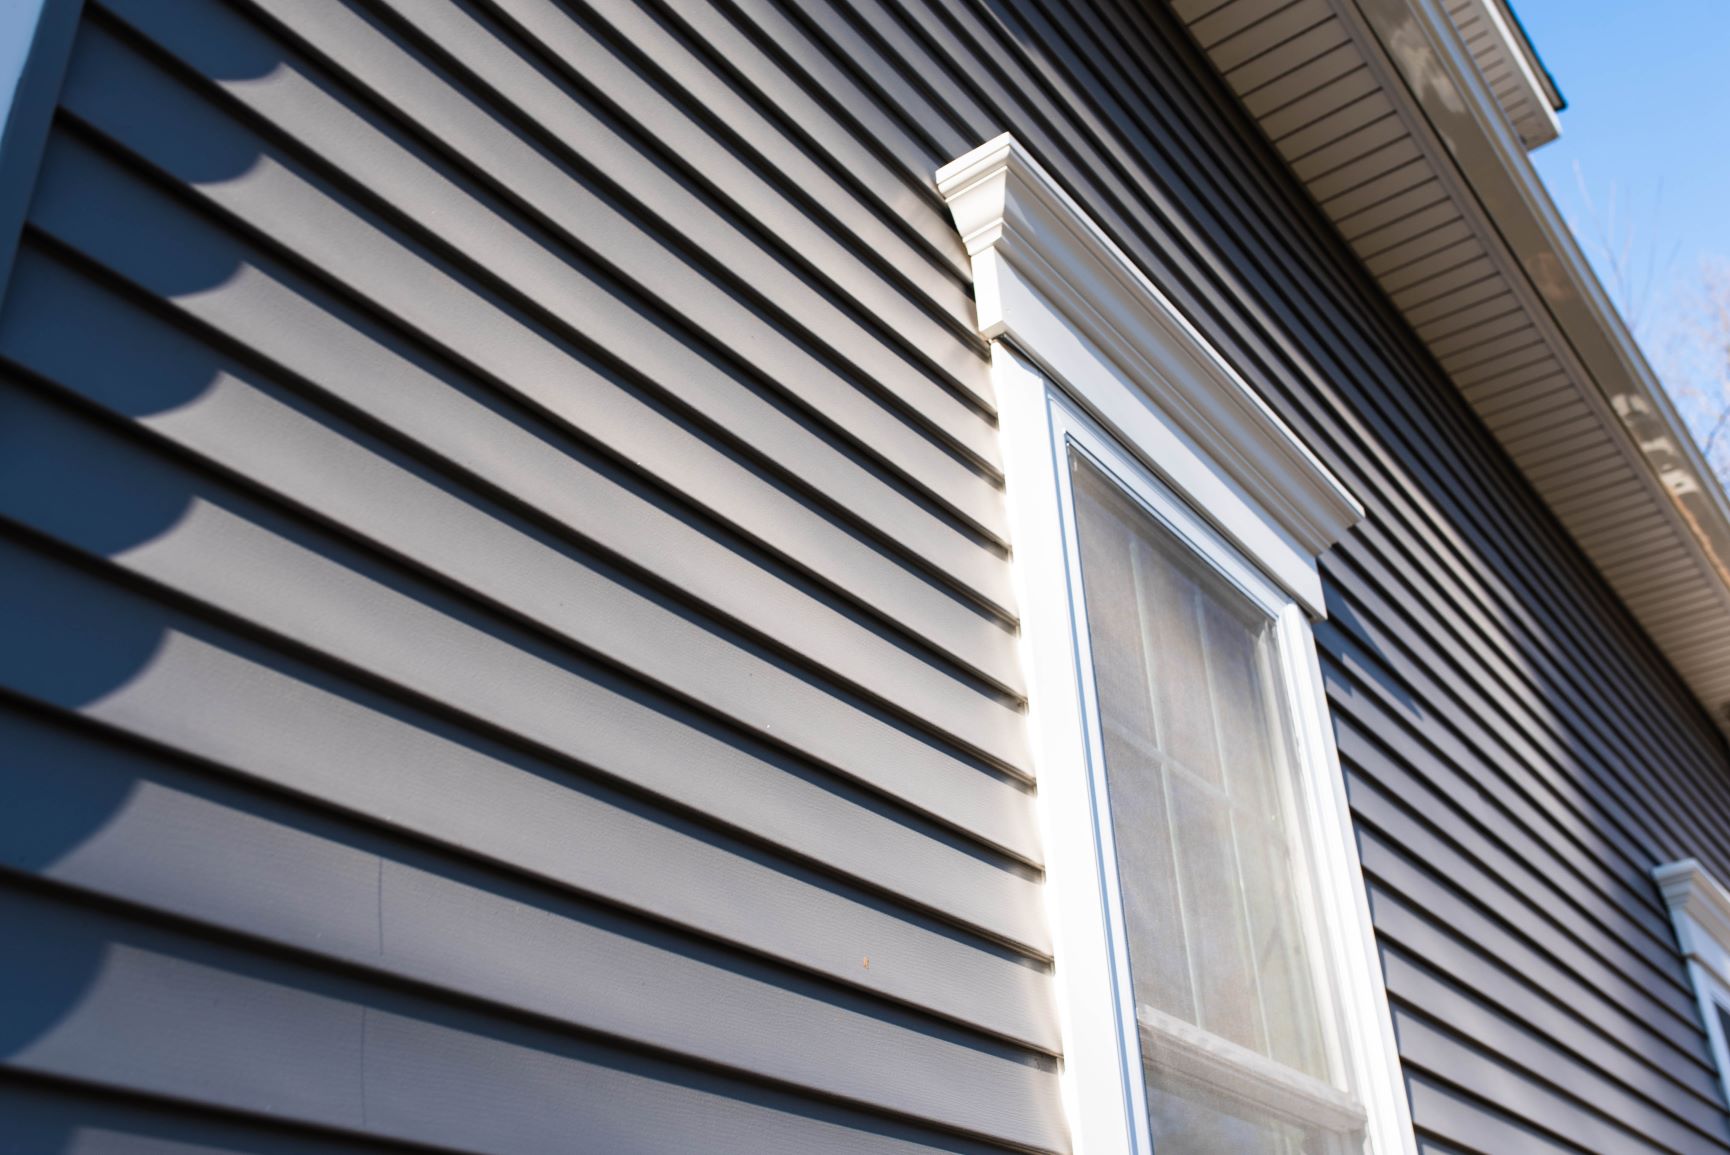 Stand Out on Your Street With New Siding